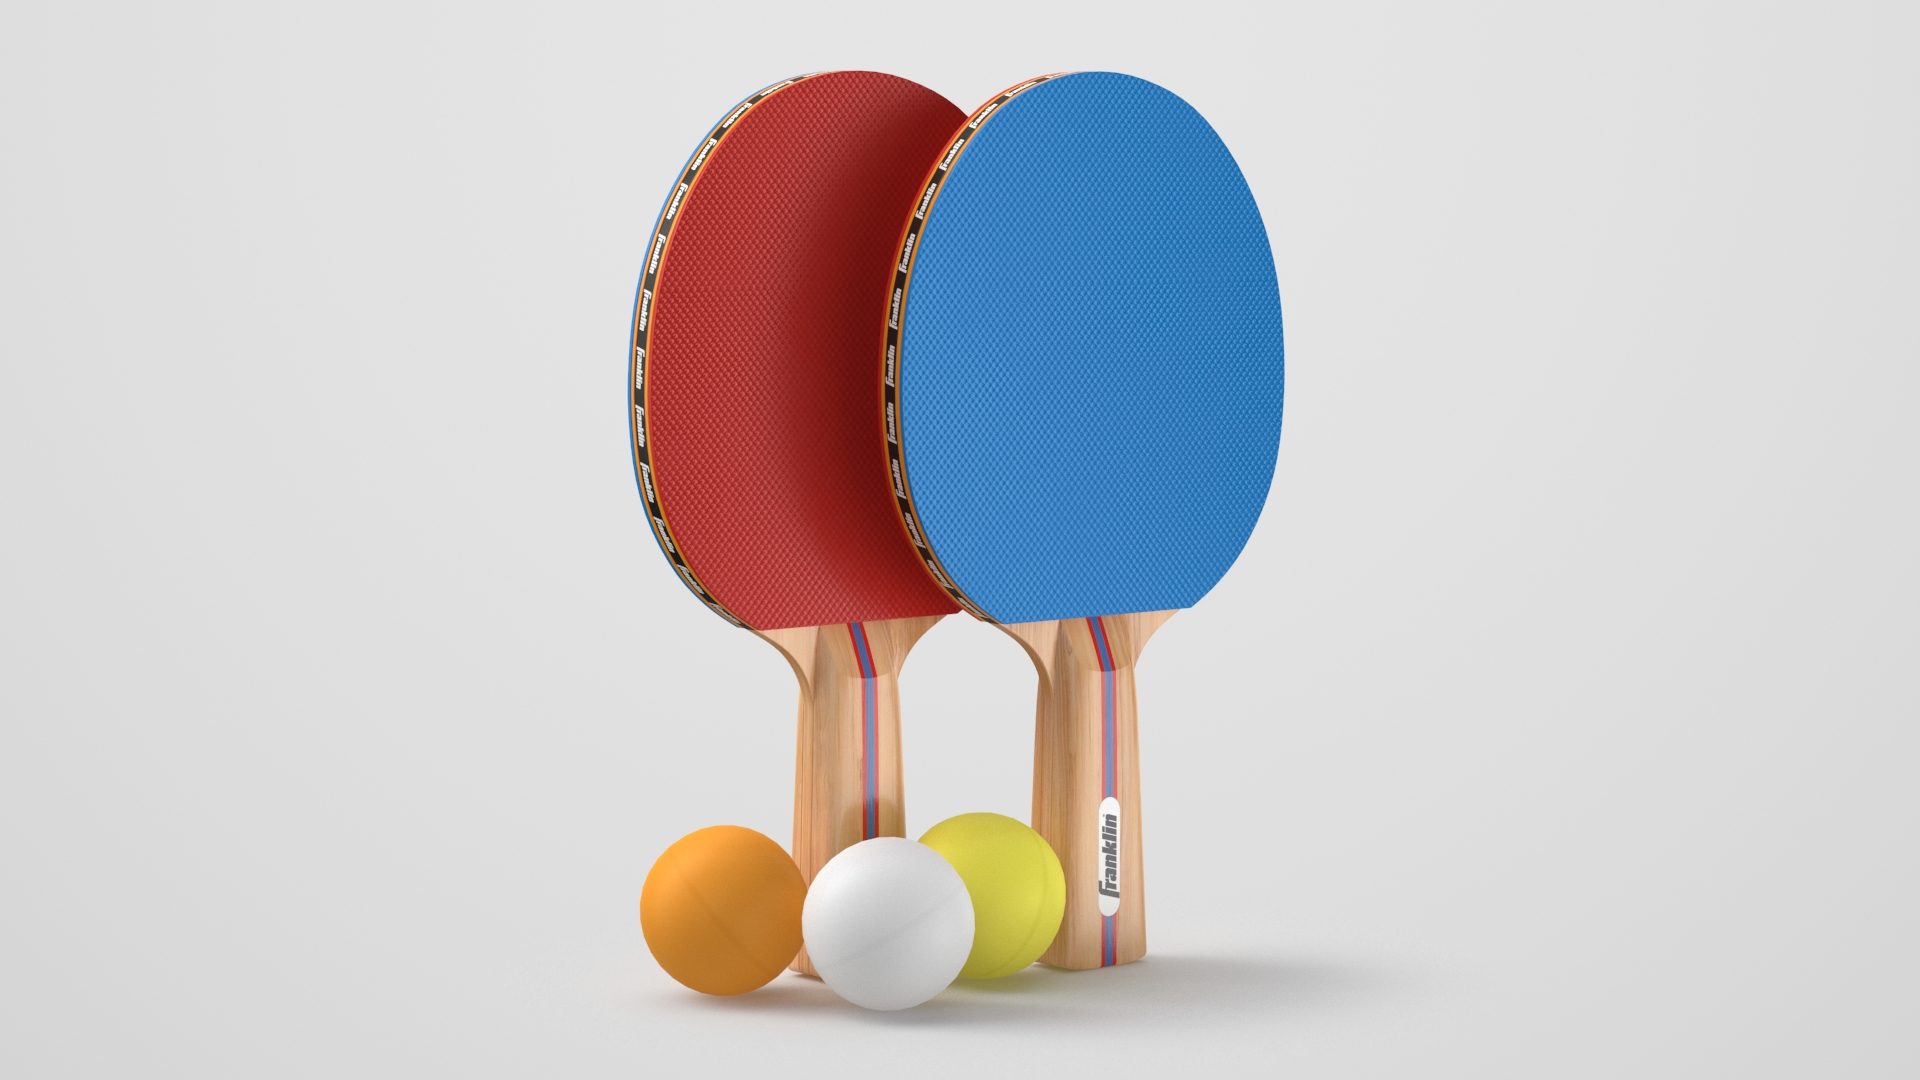 Aktive Ping Pong Pack With Rackets. Net And Balls Red